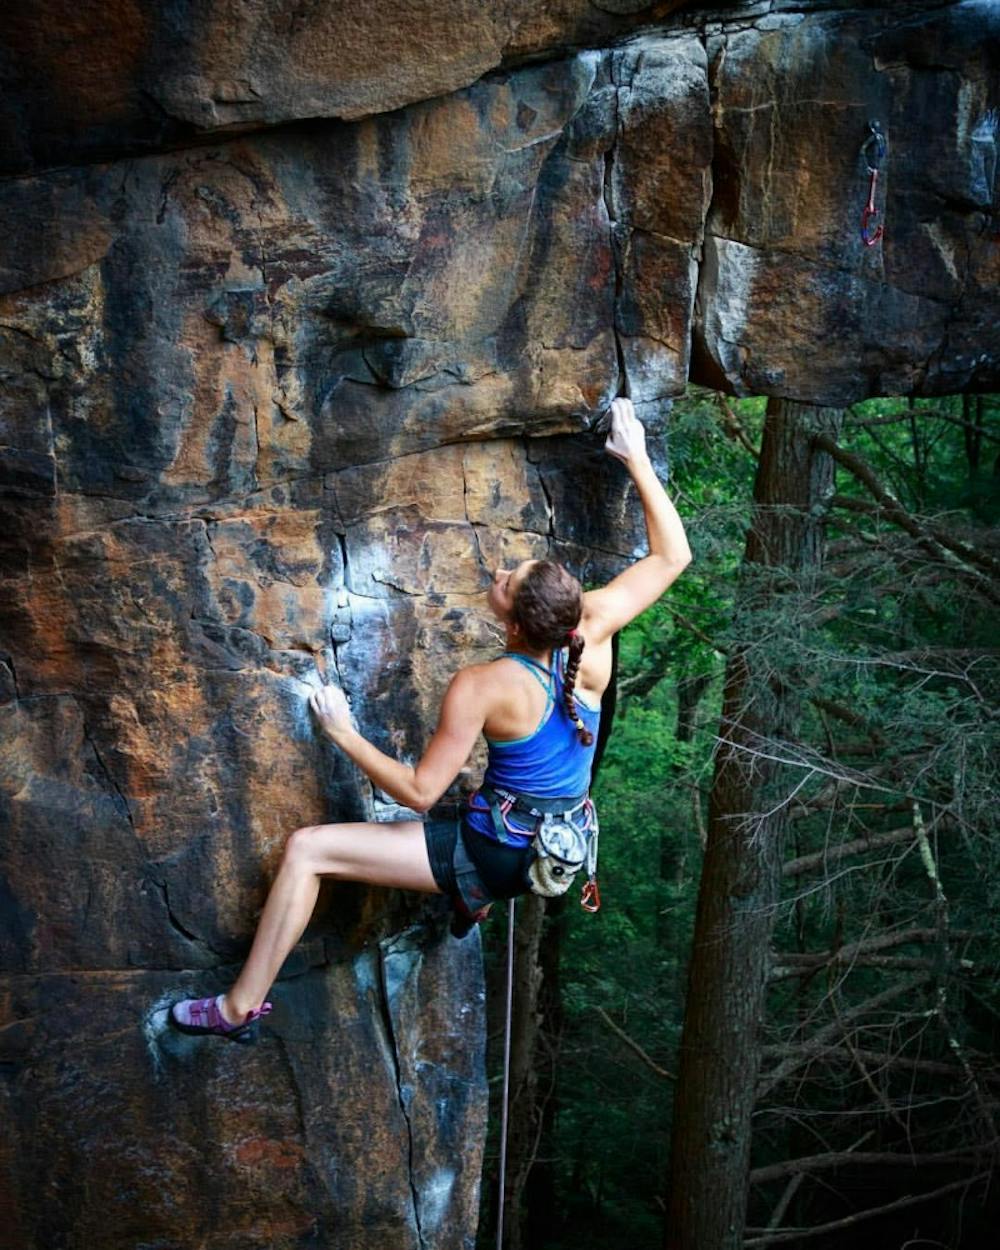 Kerry Scott, a UNC student, climbs&nbsp;Scenic Adult at the New River Gorge. Photo courtesy Michael Drake.&nbsp;